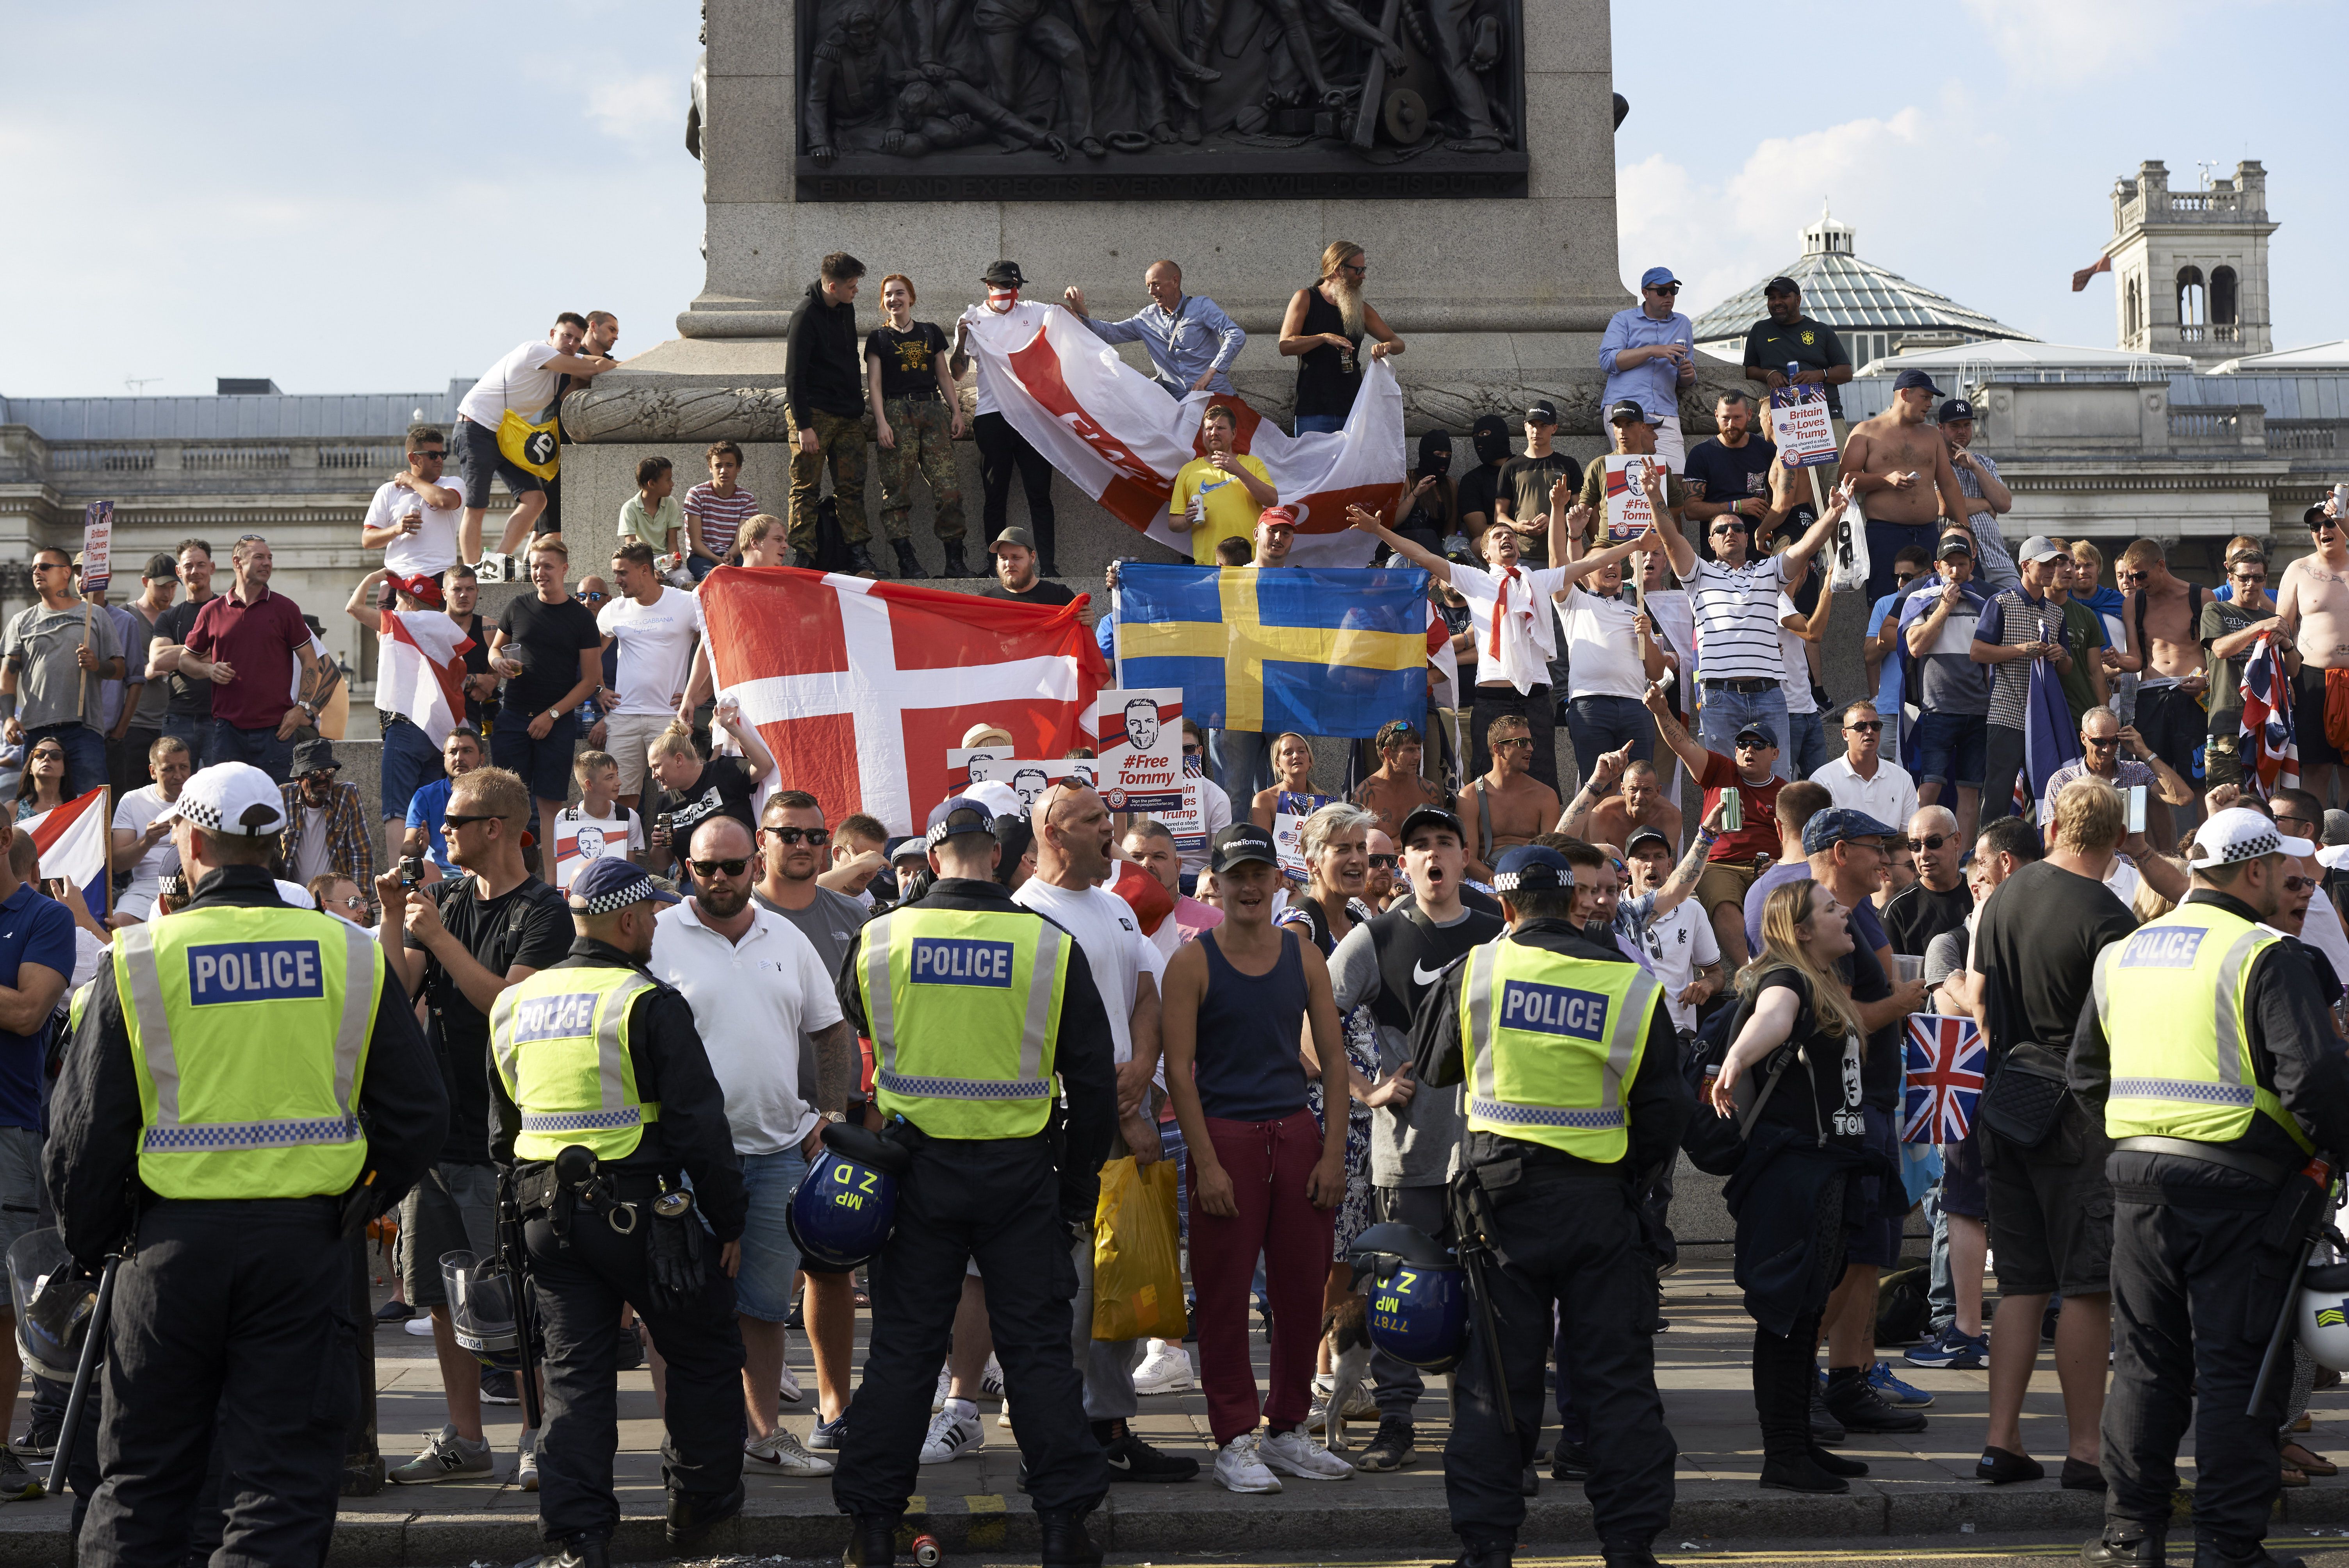 Protesters hold up flags and chant at a rally by supporters of far-right spokesman Tommy Robinson in Trafalgar Square in central London on July 14, 2018, following the jailing of Tommy Robinson for contempt of court. (Photo by Niklas HALLE'N / AFP) (Photo credit should read NIKLAS HALLE'N/AFP/Getty Images)